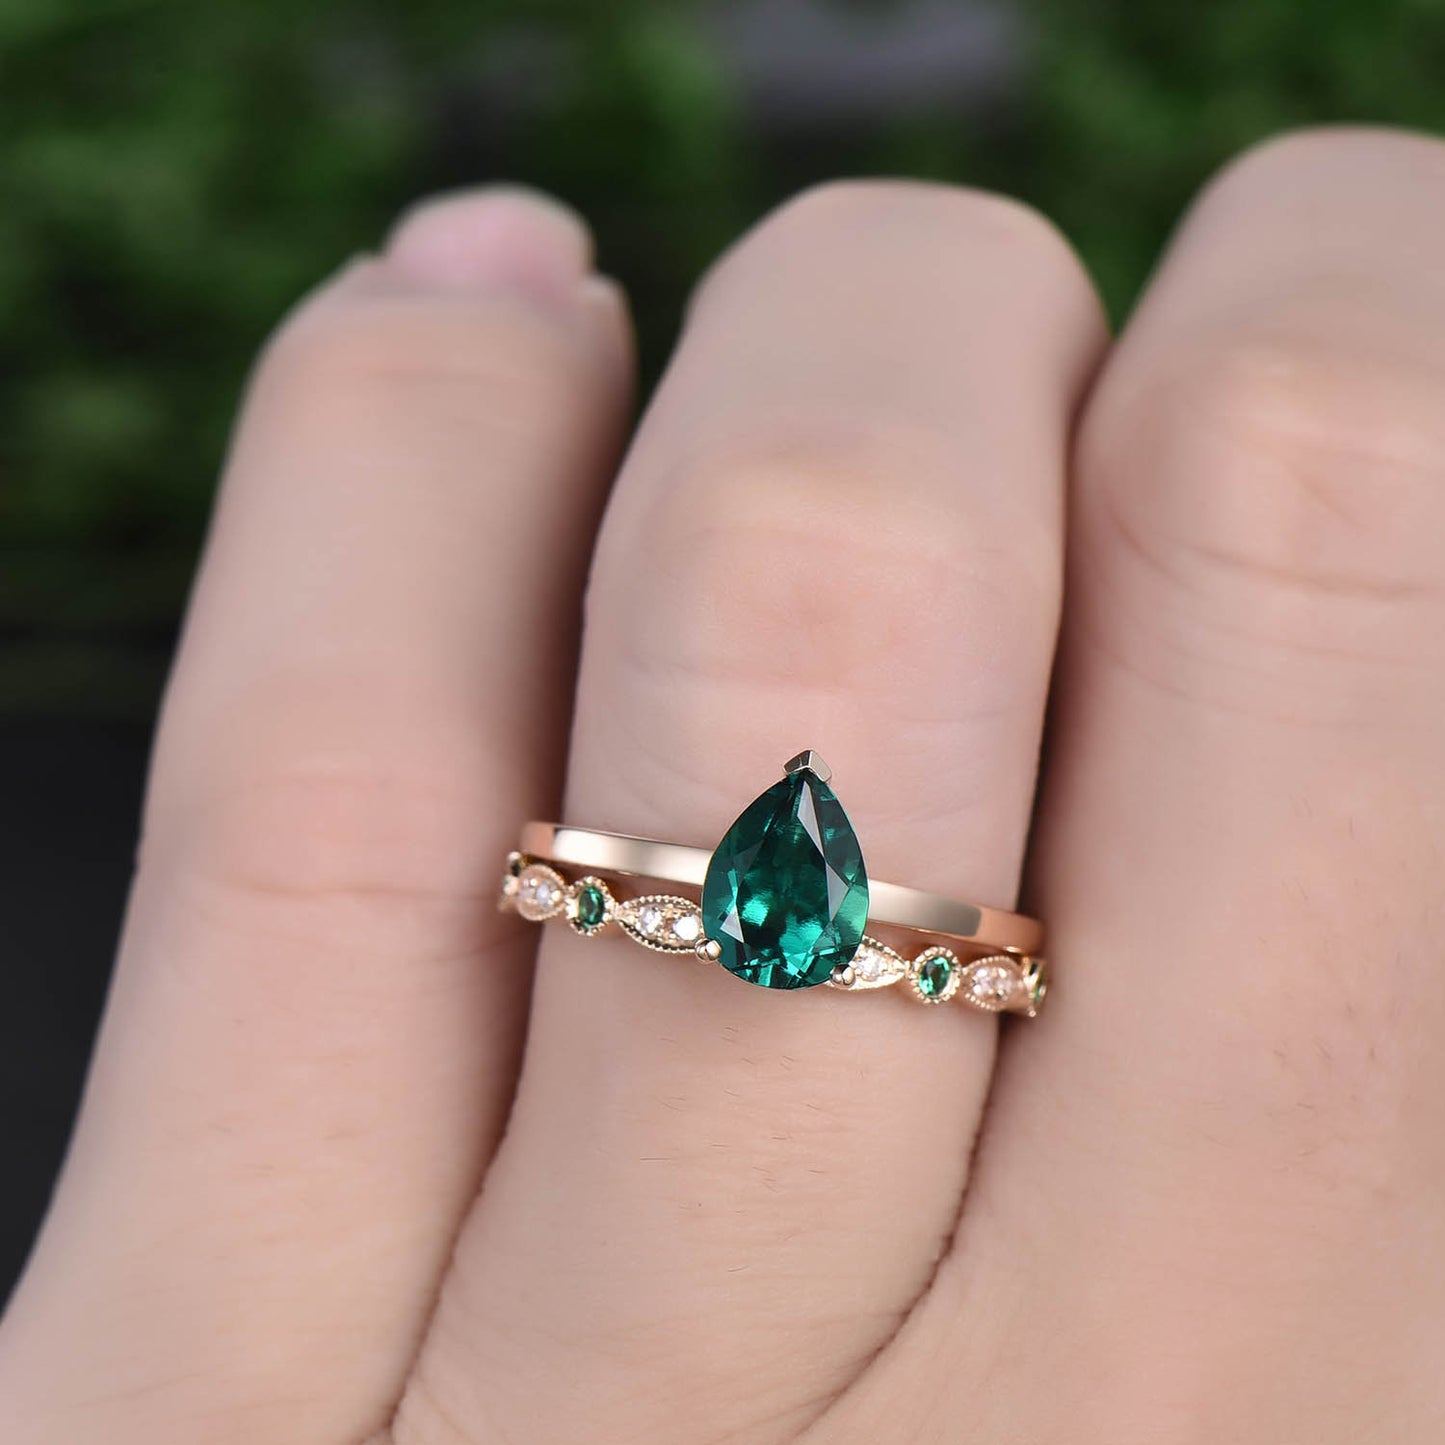 Solitaire emerald ring vintage 2pcs pear emerald engagement ring set solid yellow gold real diamond ring natural emerald wedding band